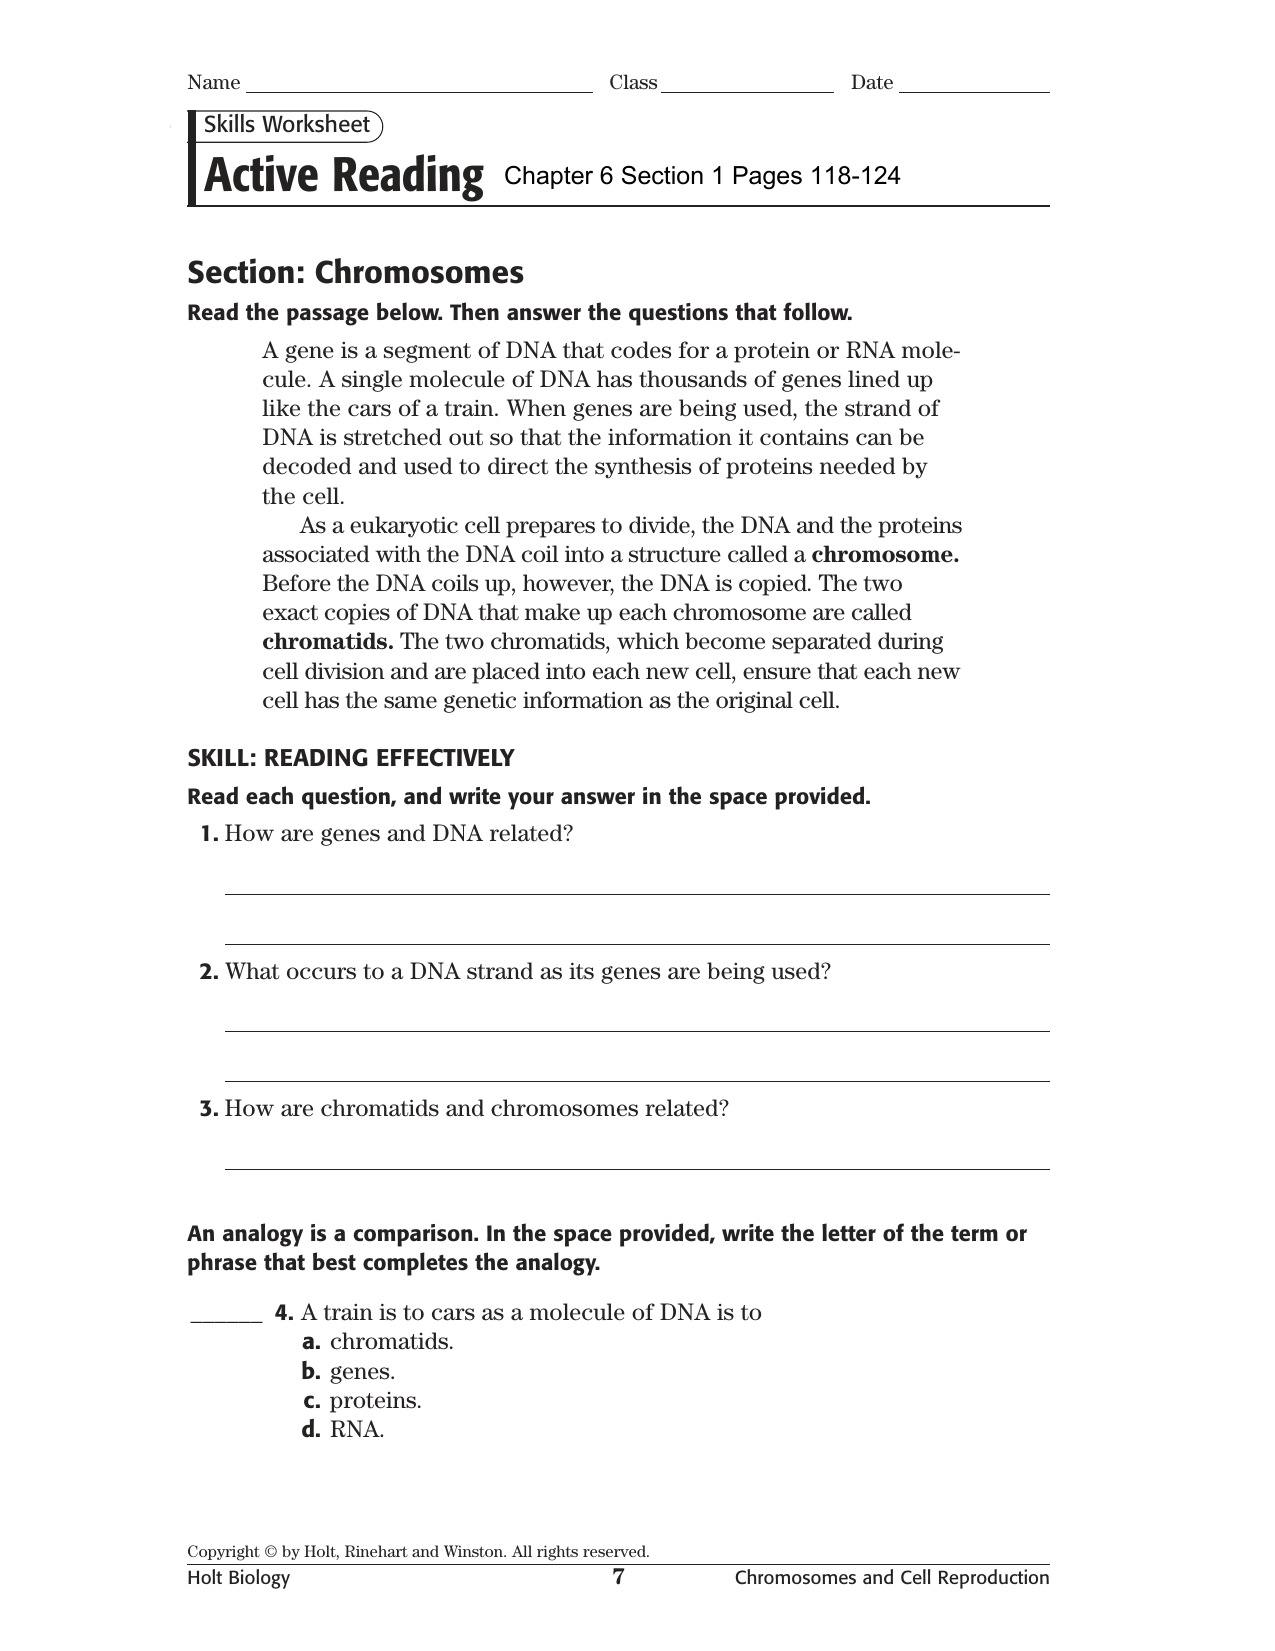 Chromosomes And Cell Reproduction Worksheet Answers Ivuyteq